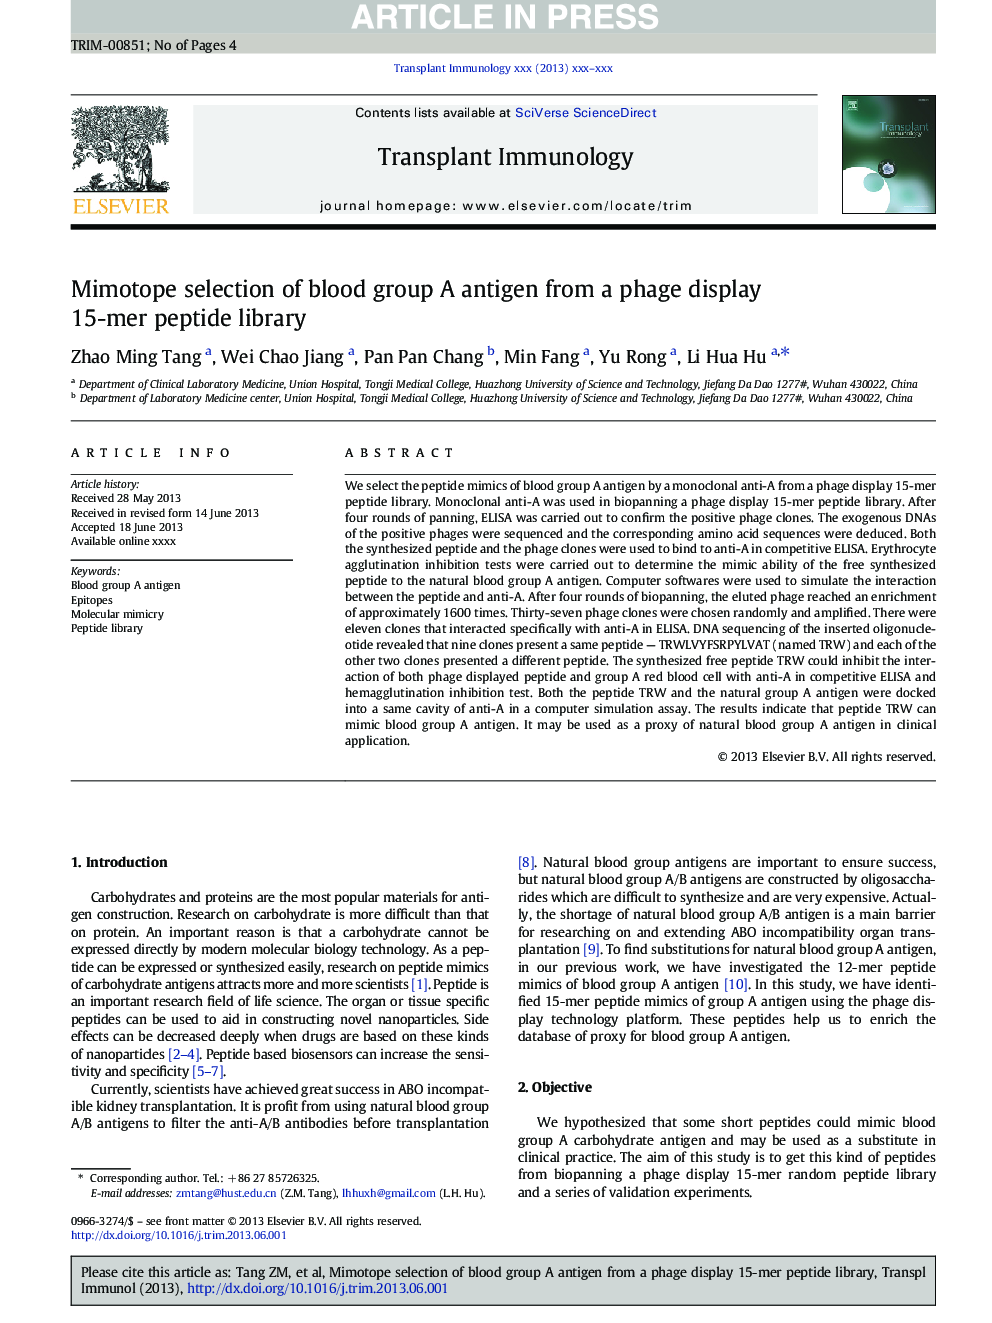 Mimotope selection of blood group A antigen from a phage display 15-mer peptide library